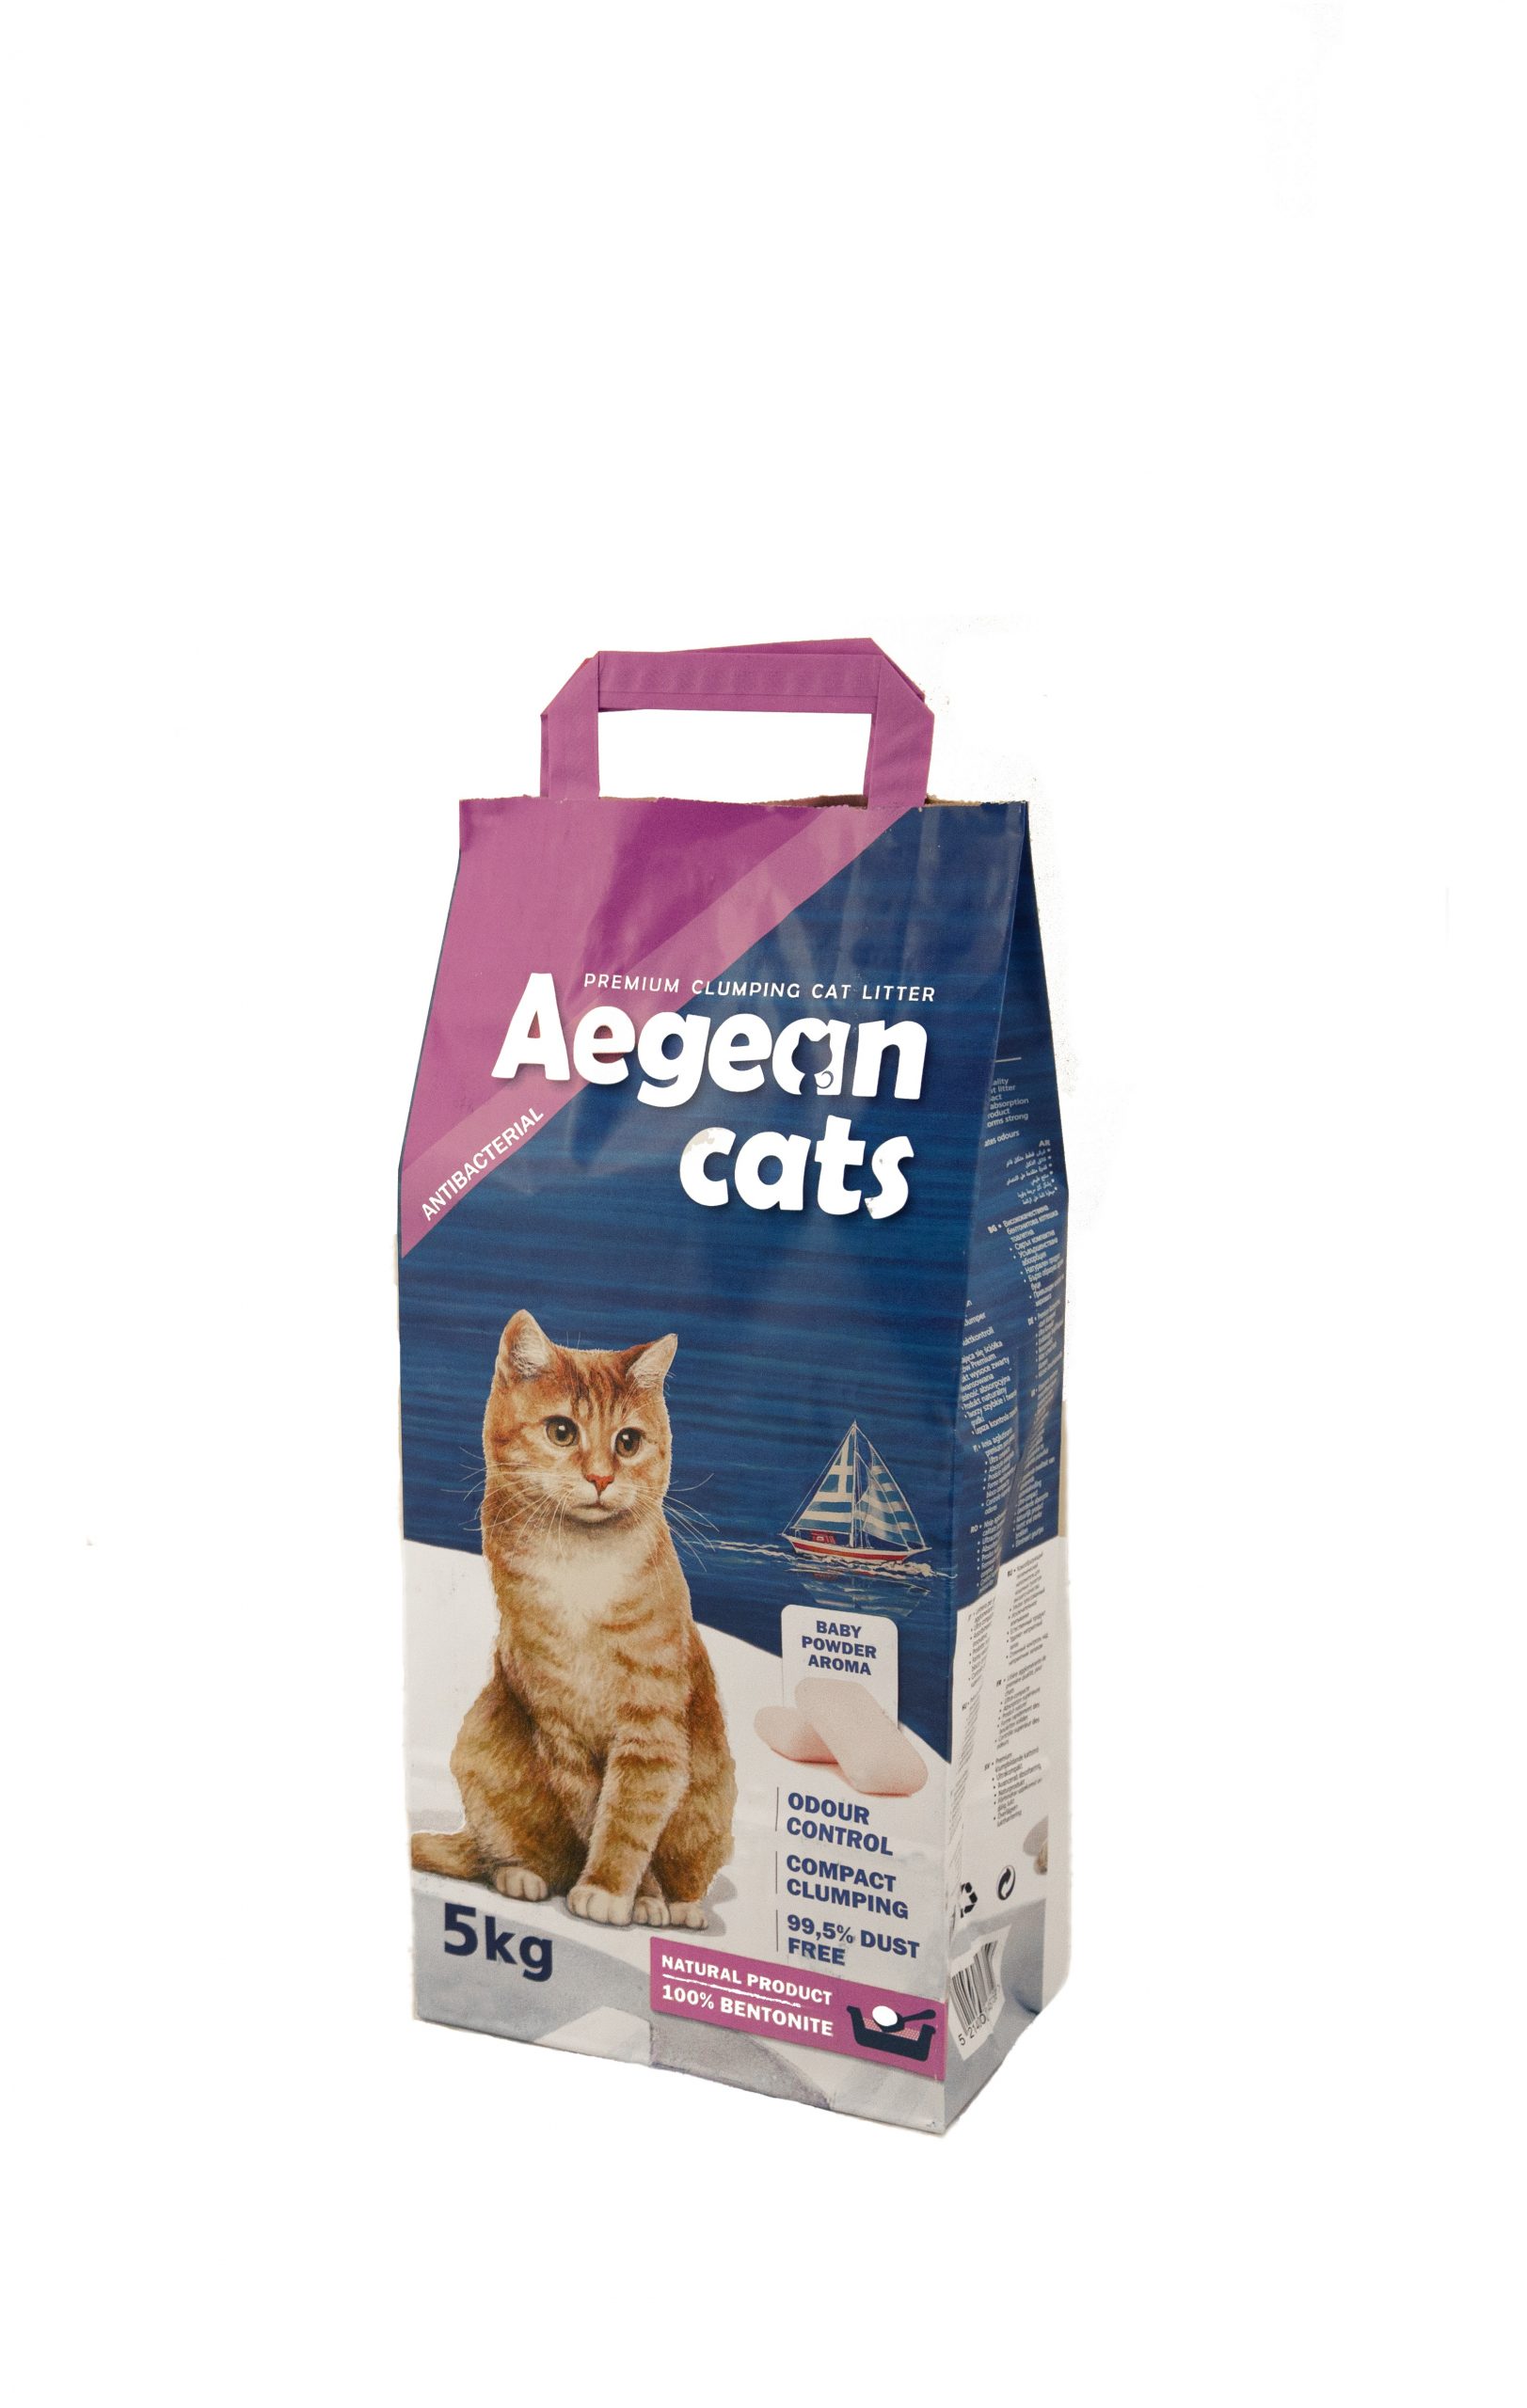 Aegean Cats Natural Cat Litter (5kg) perfumed with baby powder